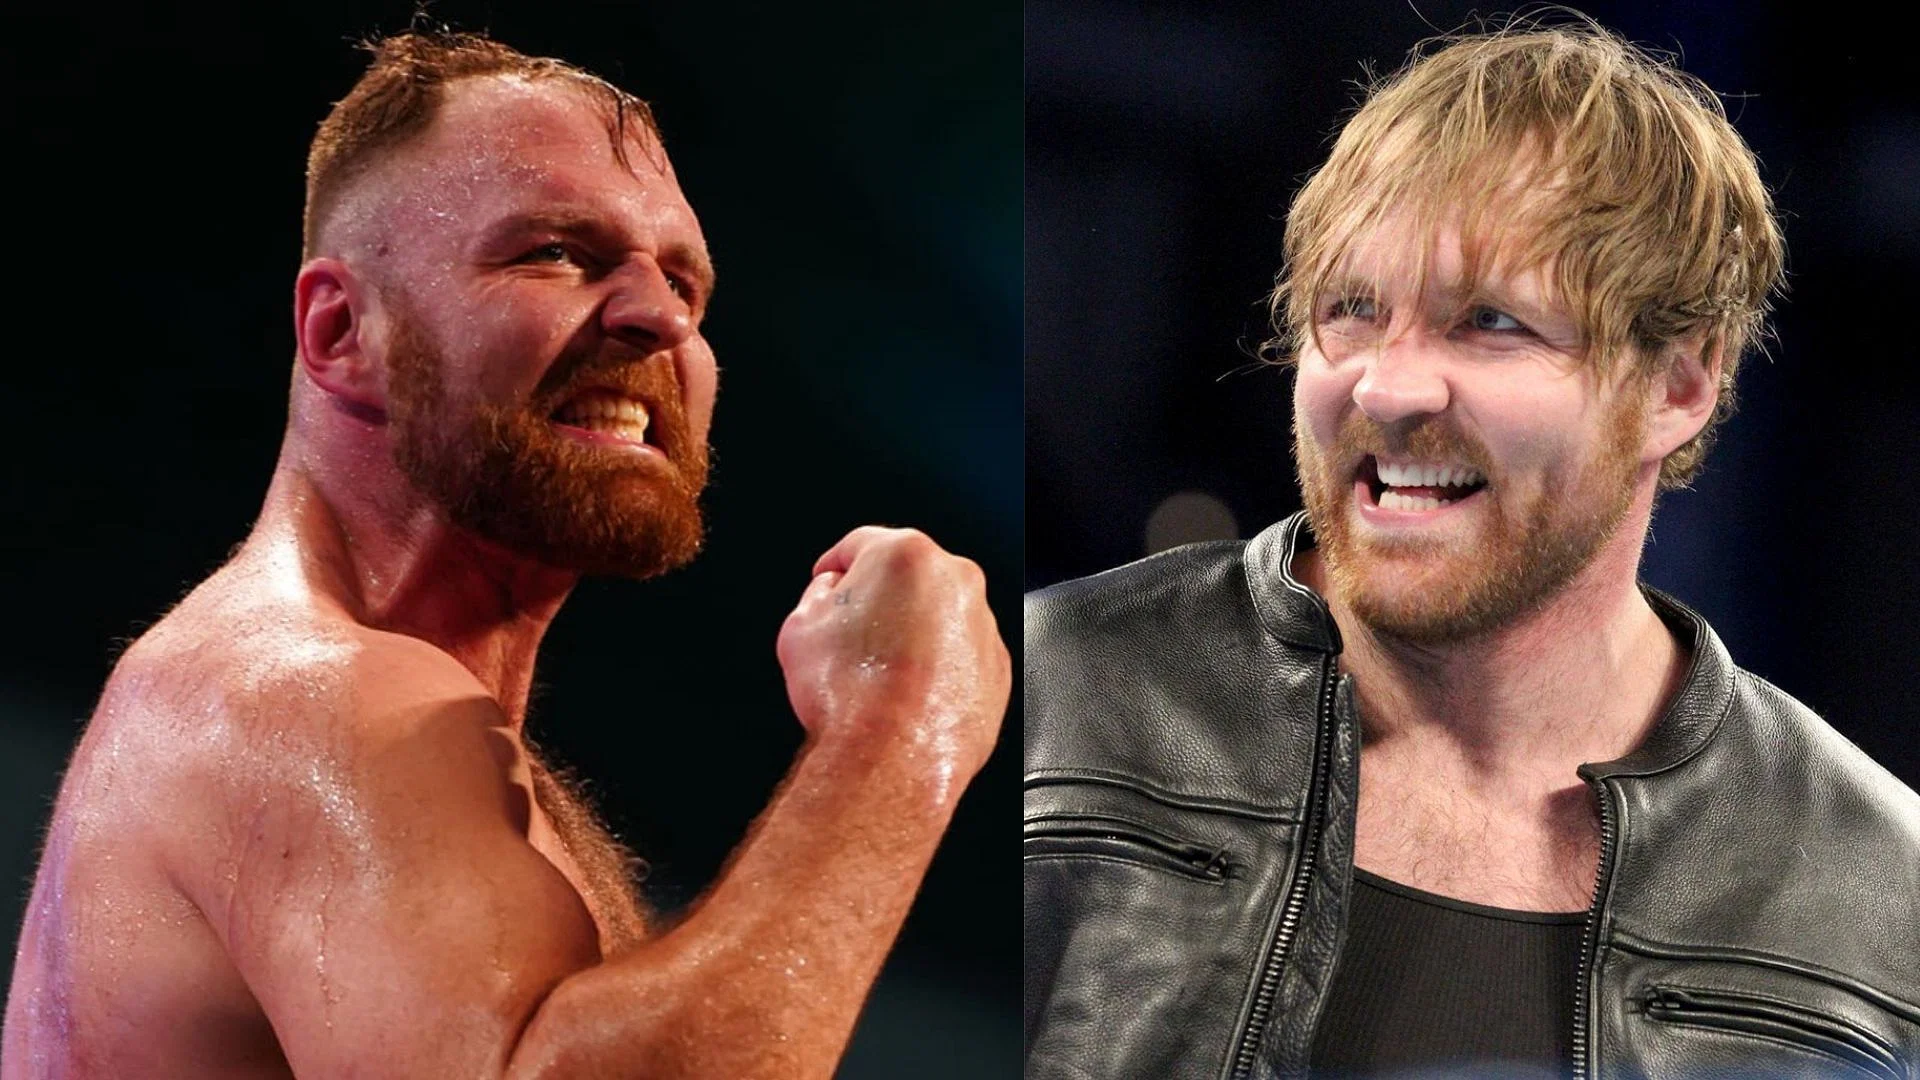 Nostalgia and Tribute: The Unbroken Legacy of Dean Ambrose in WWE's Asylum